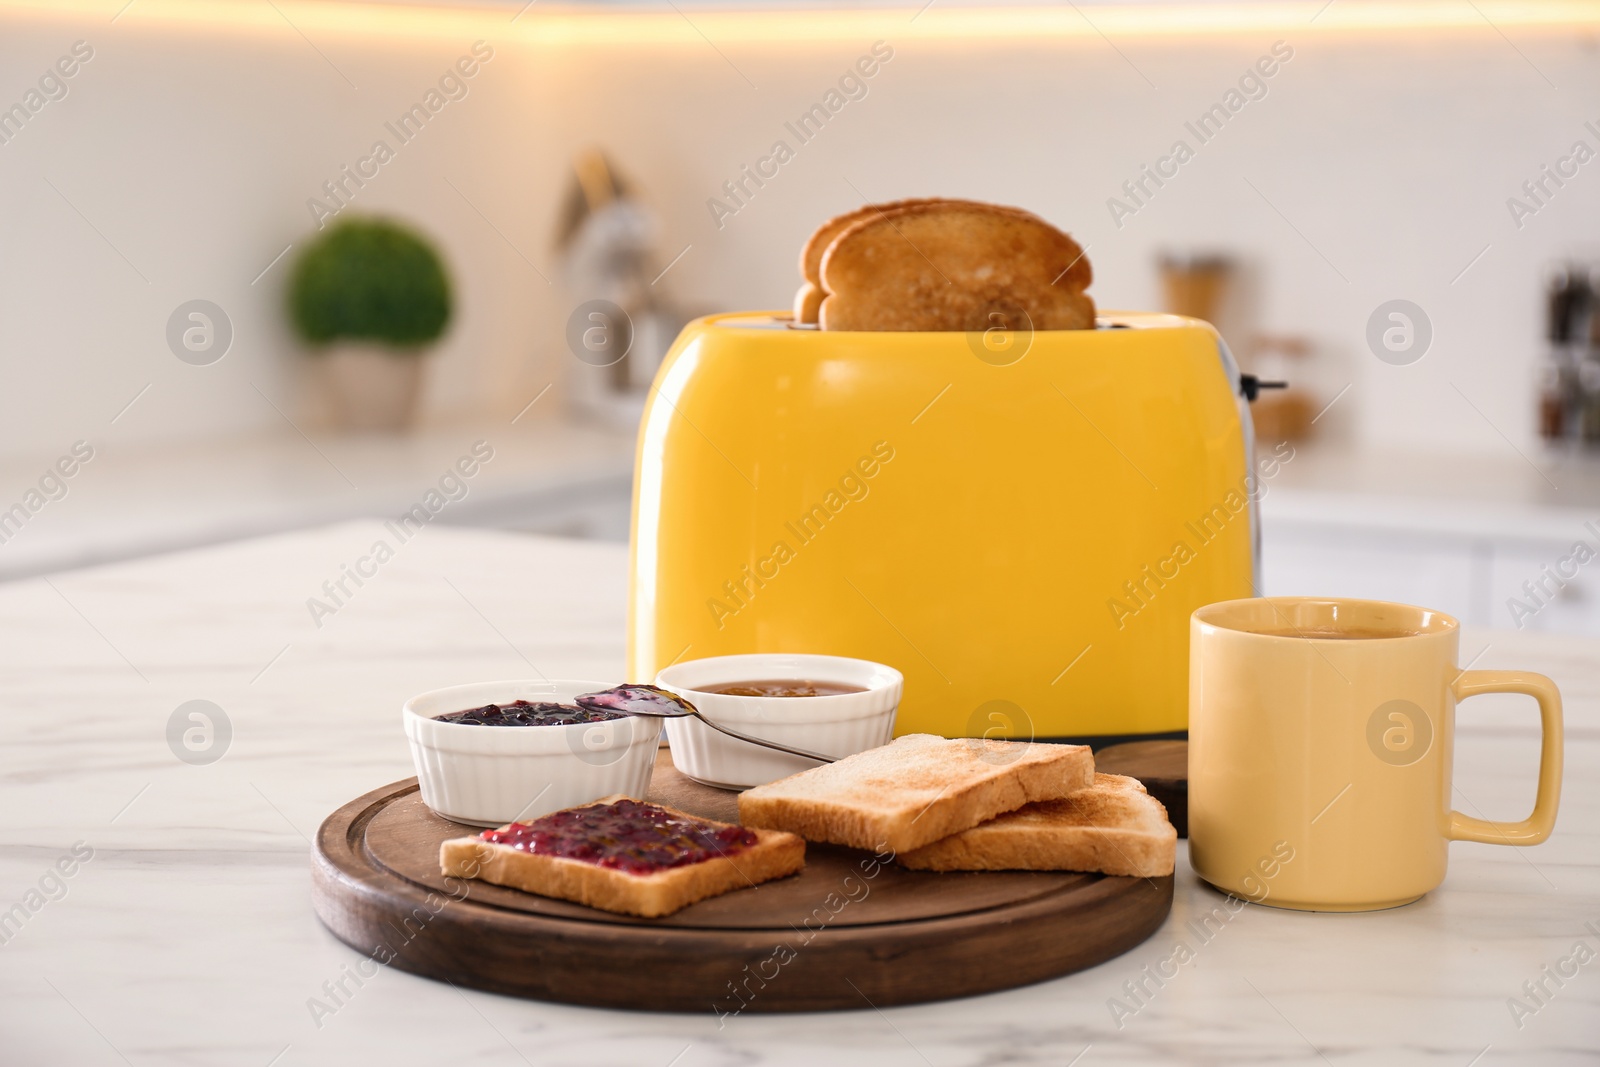 Photo of Modern toaster and tasty breakfast on white marble table in kitchen